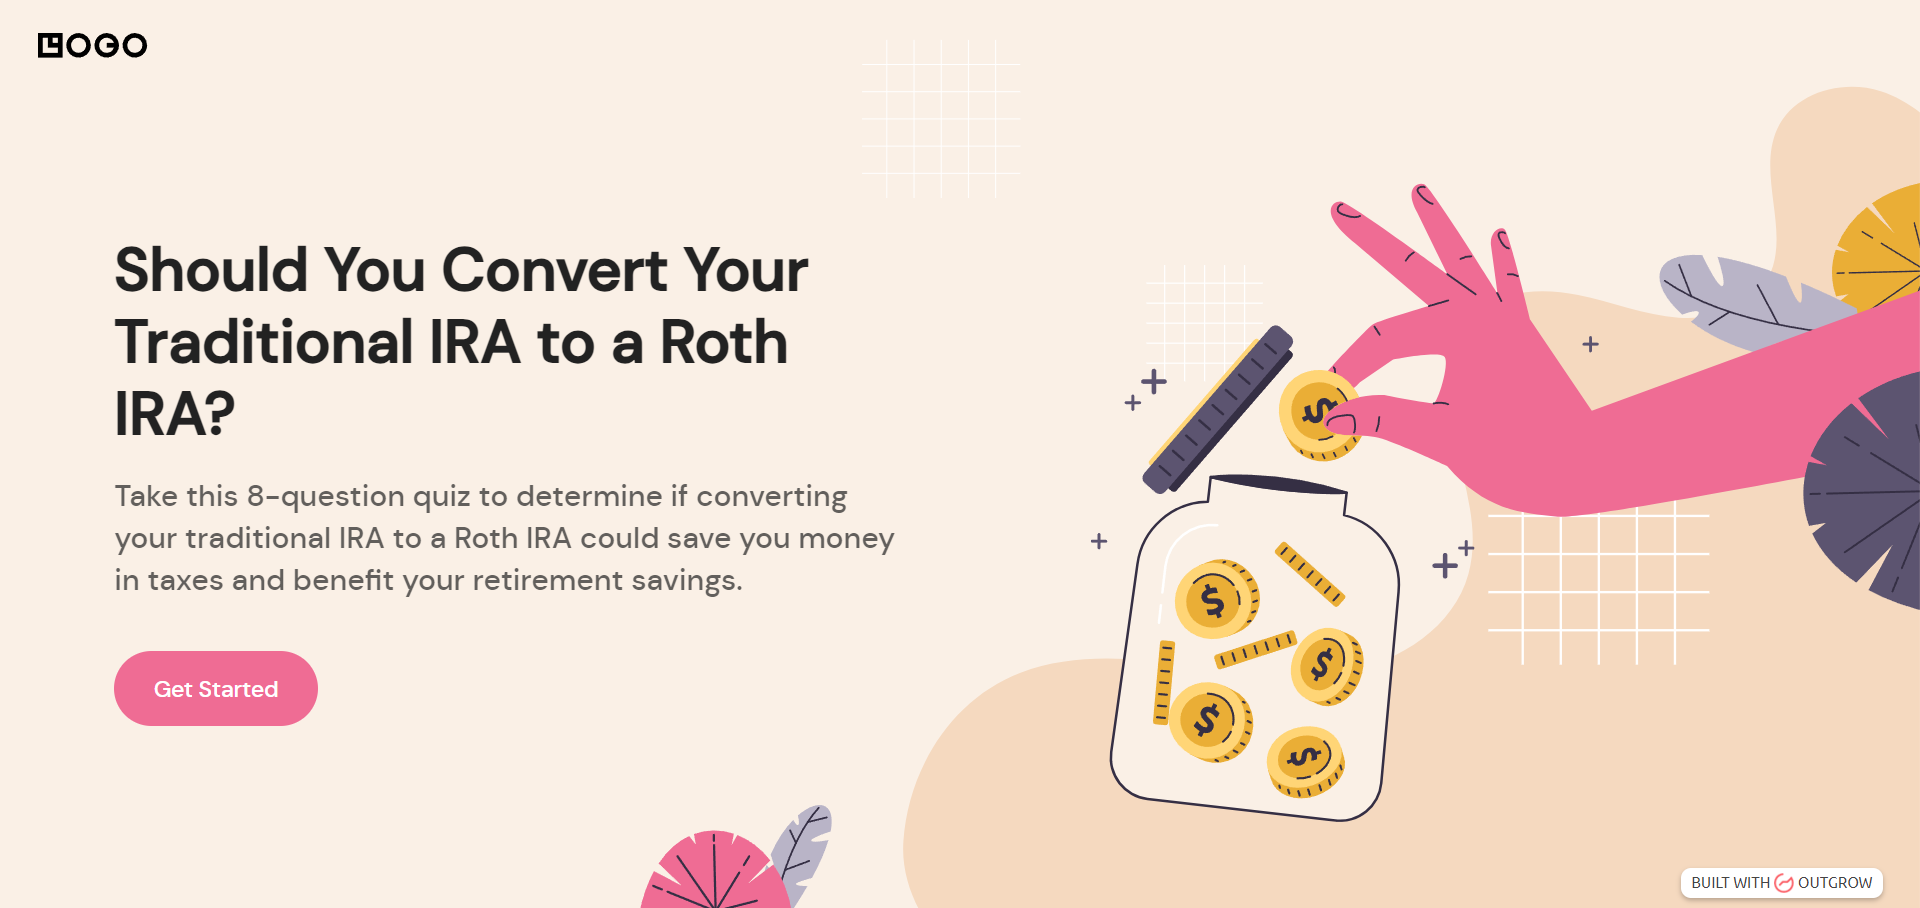 Should You Convert Your Traditional IRA to a Roth IRA